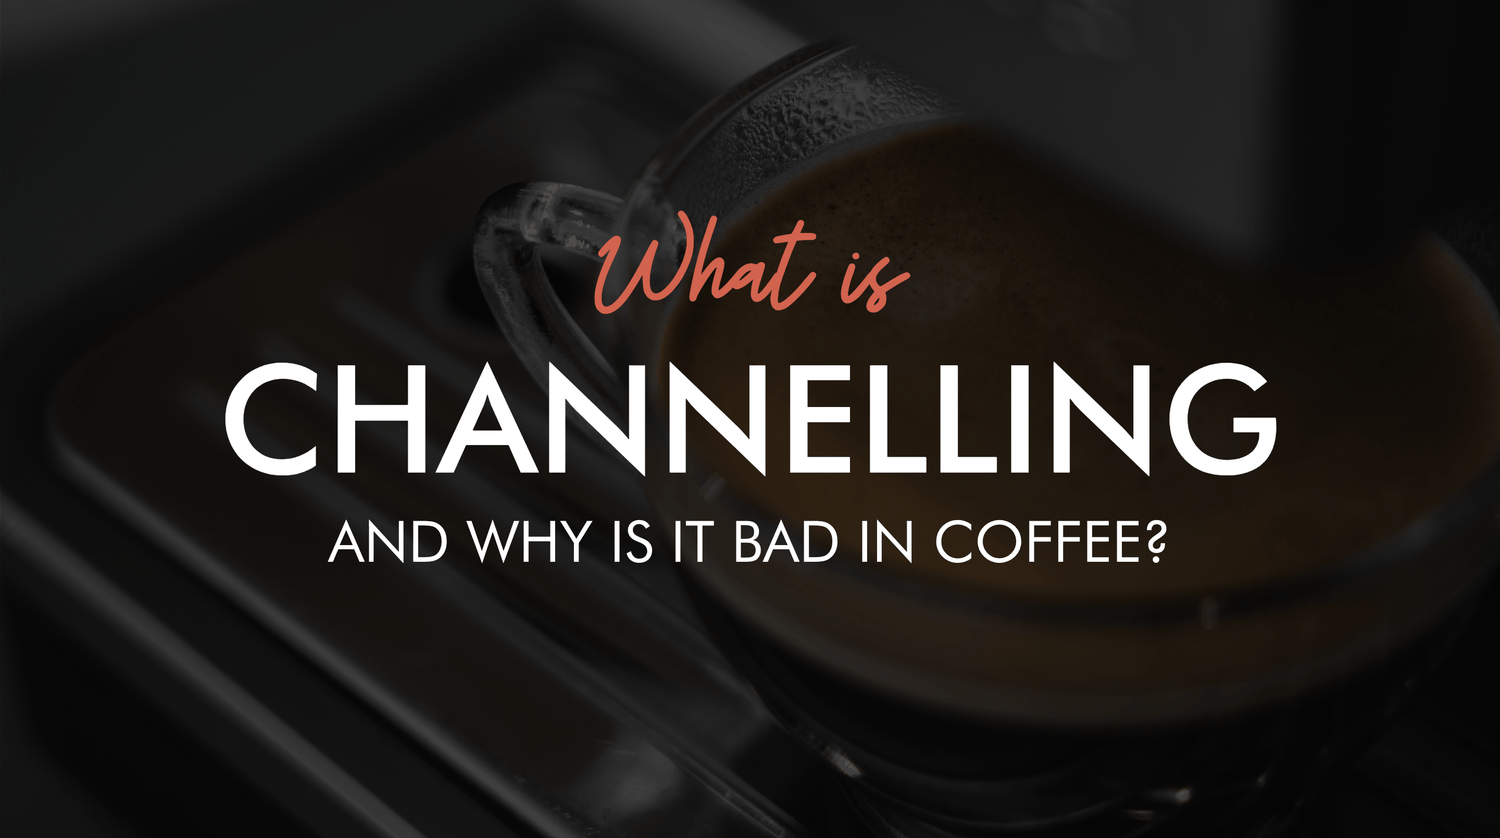 What is channelling and why is it bad in coffee title blog image